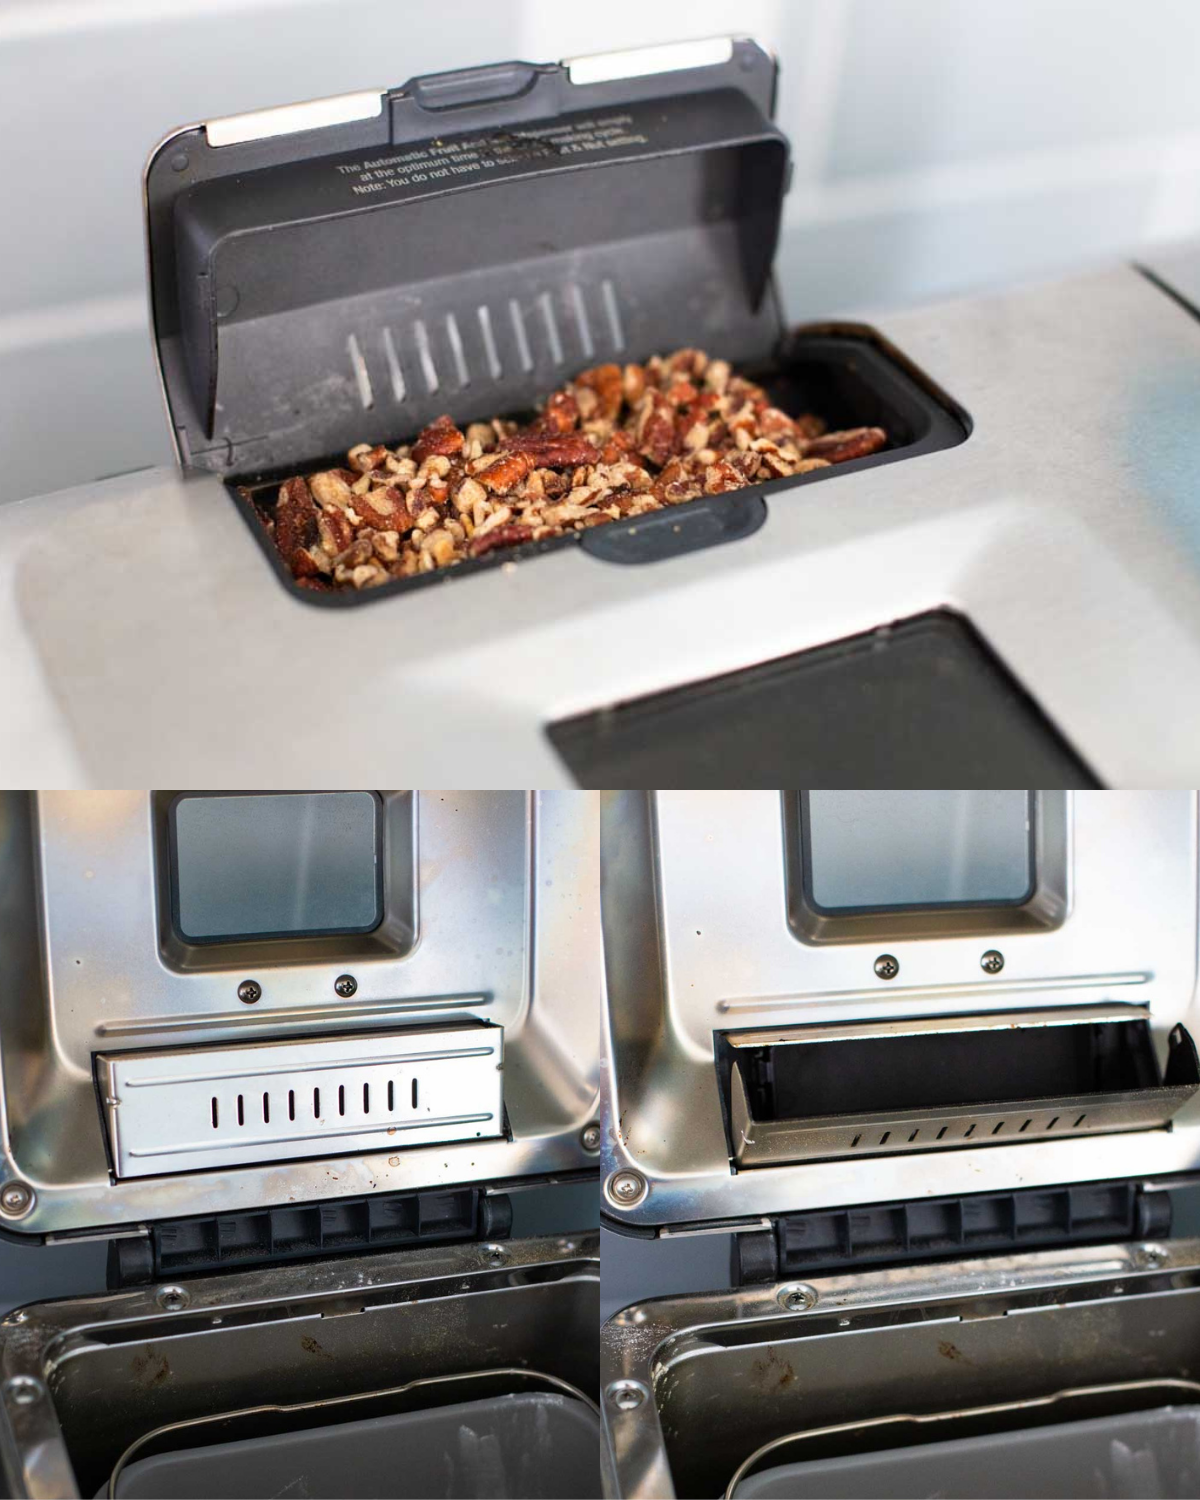 A photo collage shows the nut dispenser on the Breville bread maker. Photo at top shows chopped pecans filling the dispenser, the bottom two photos show the trap door opened and closed.